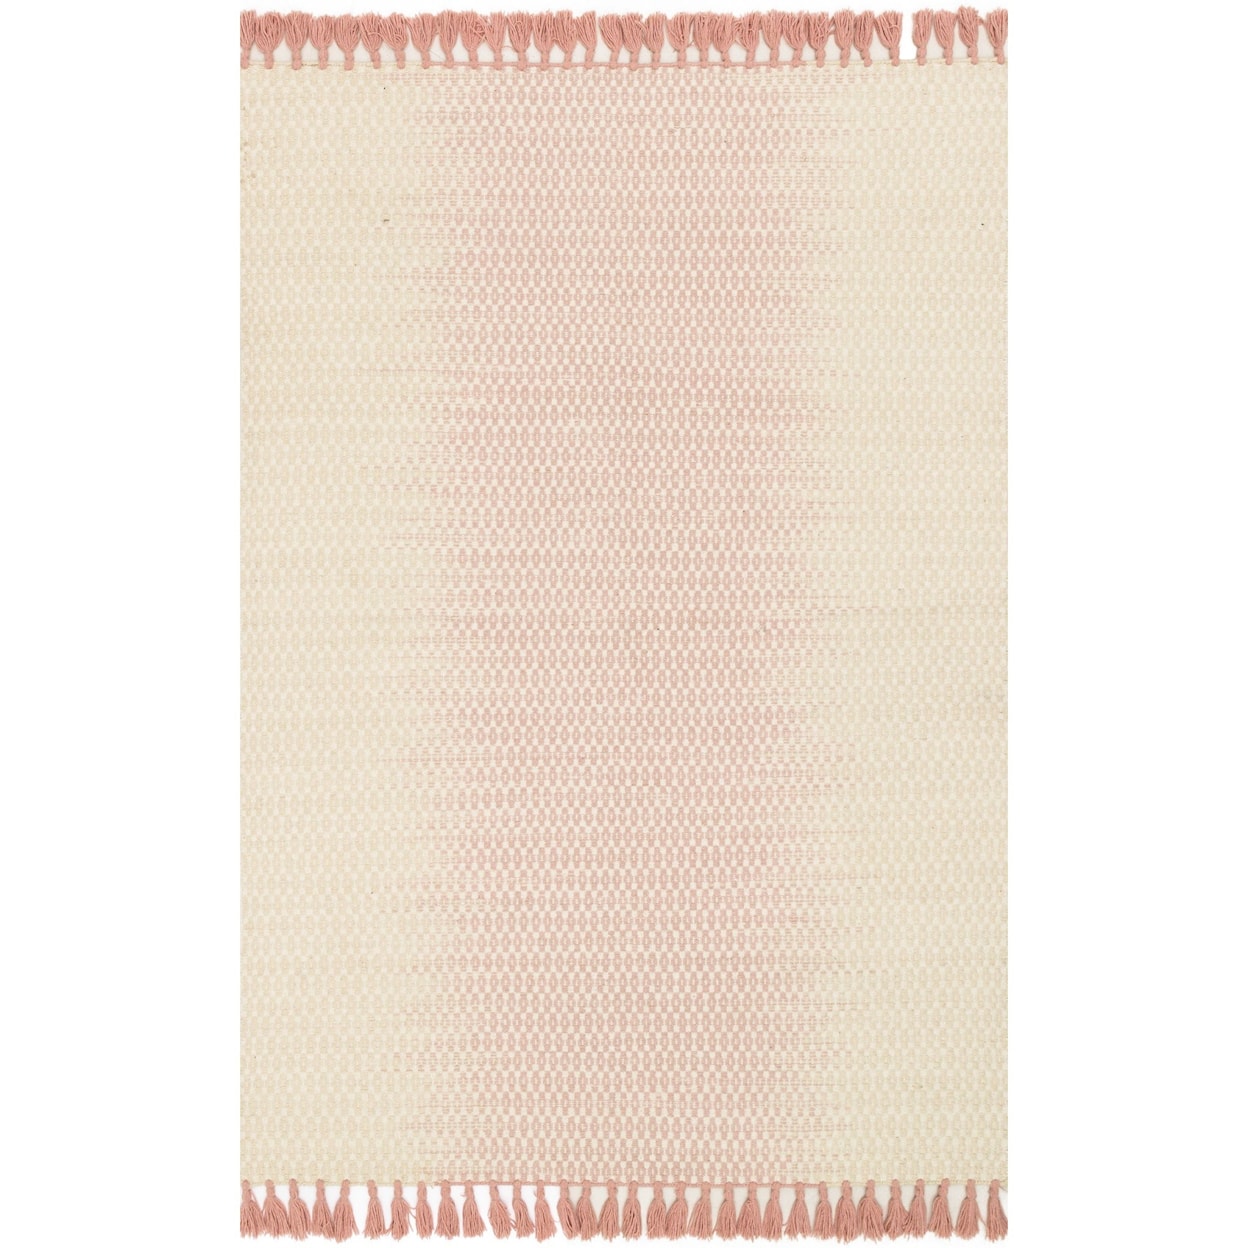 Magnolia Home by Joanna Gaines for Loloi Chantilly 9' 3" X 13' Rectangle Rug